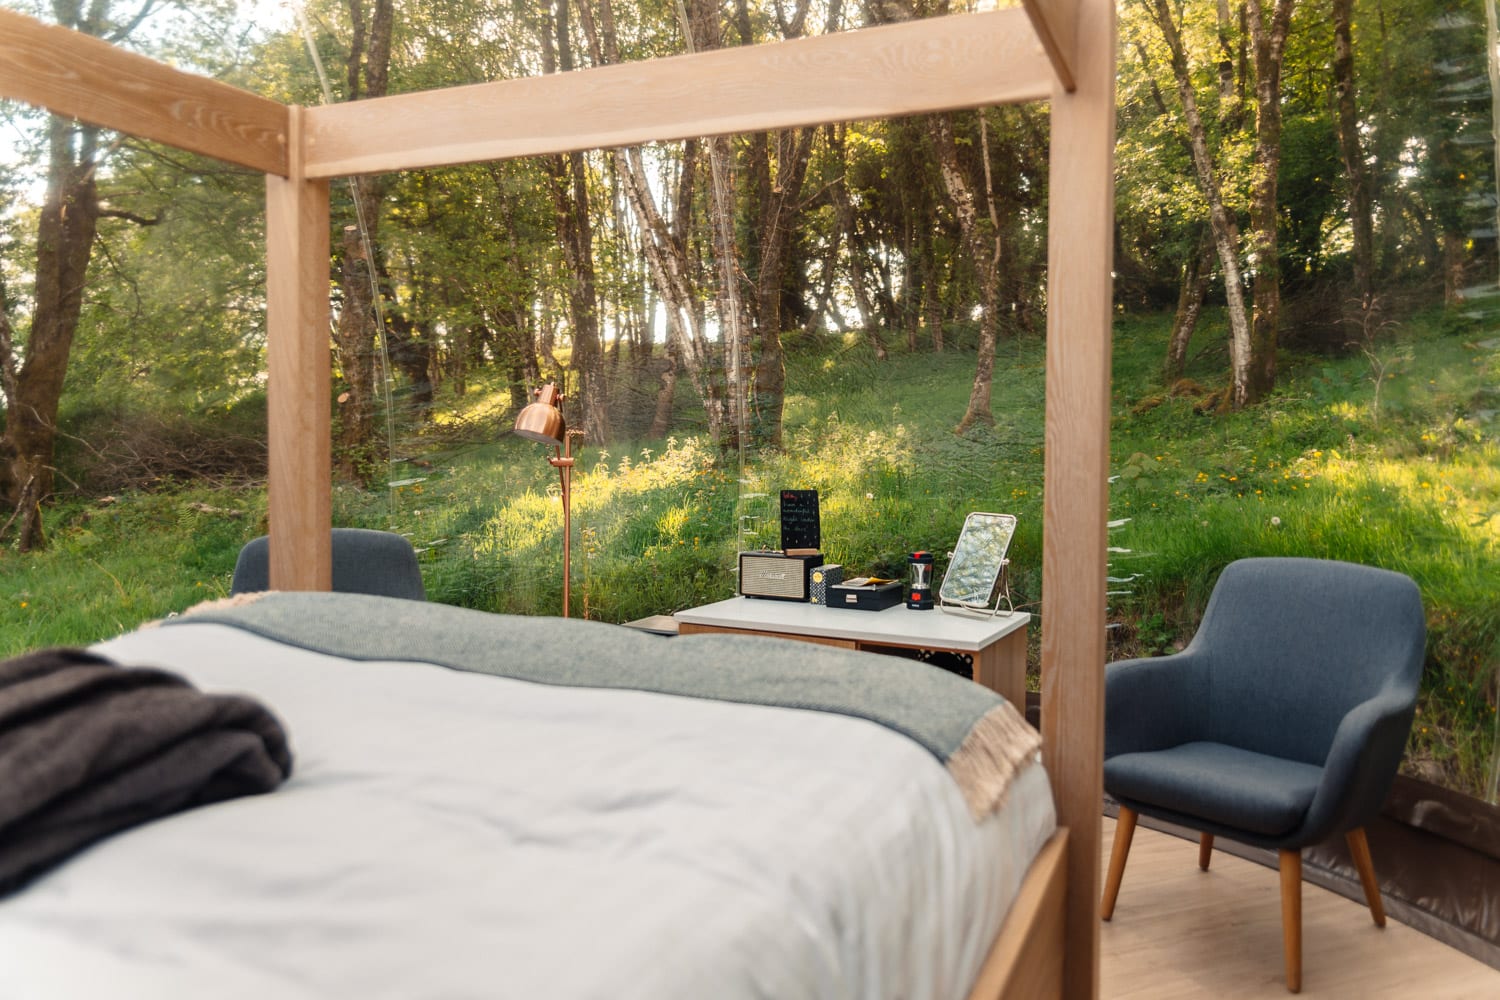 Four-poster bed in Finn Lough Resort's Bubble Dome